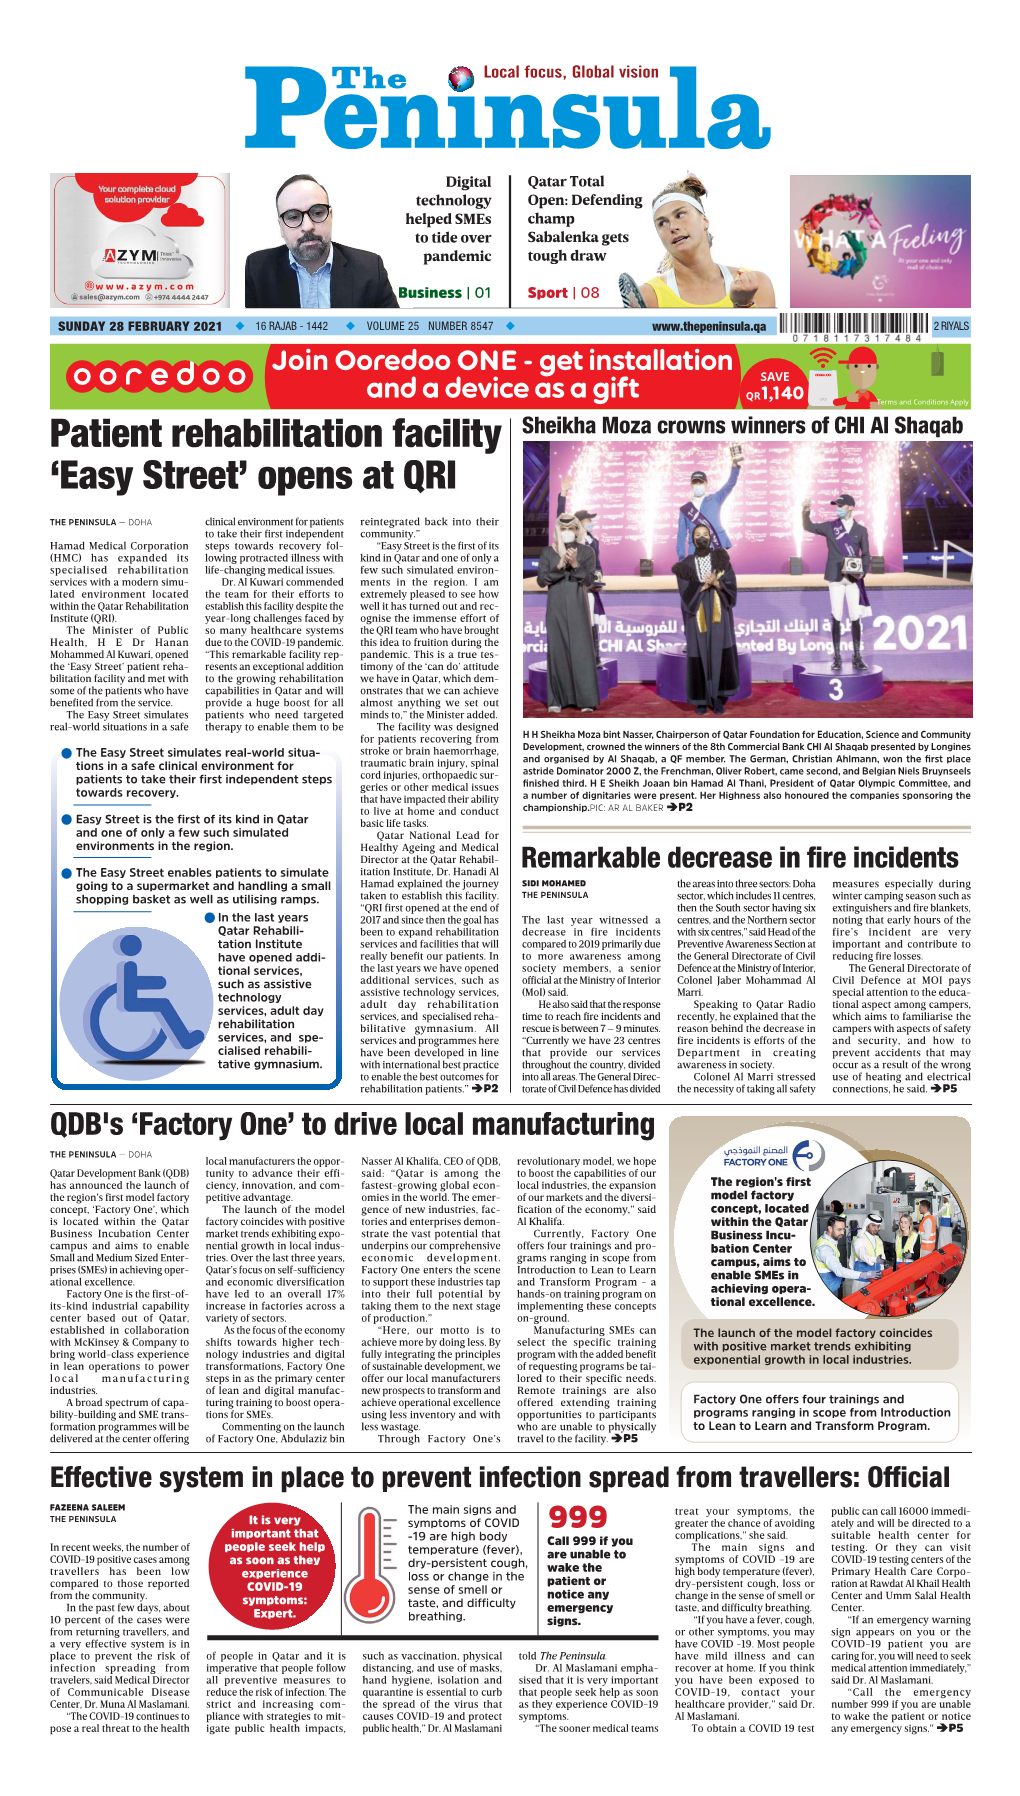 Patient Rehabilitation Facility 'Easy Street' Opens At